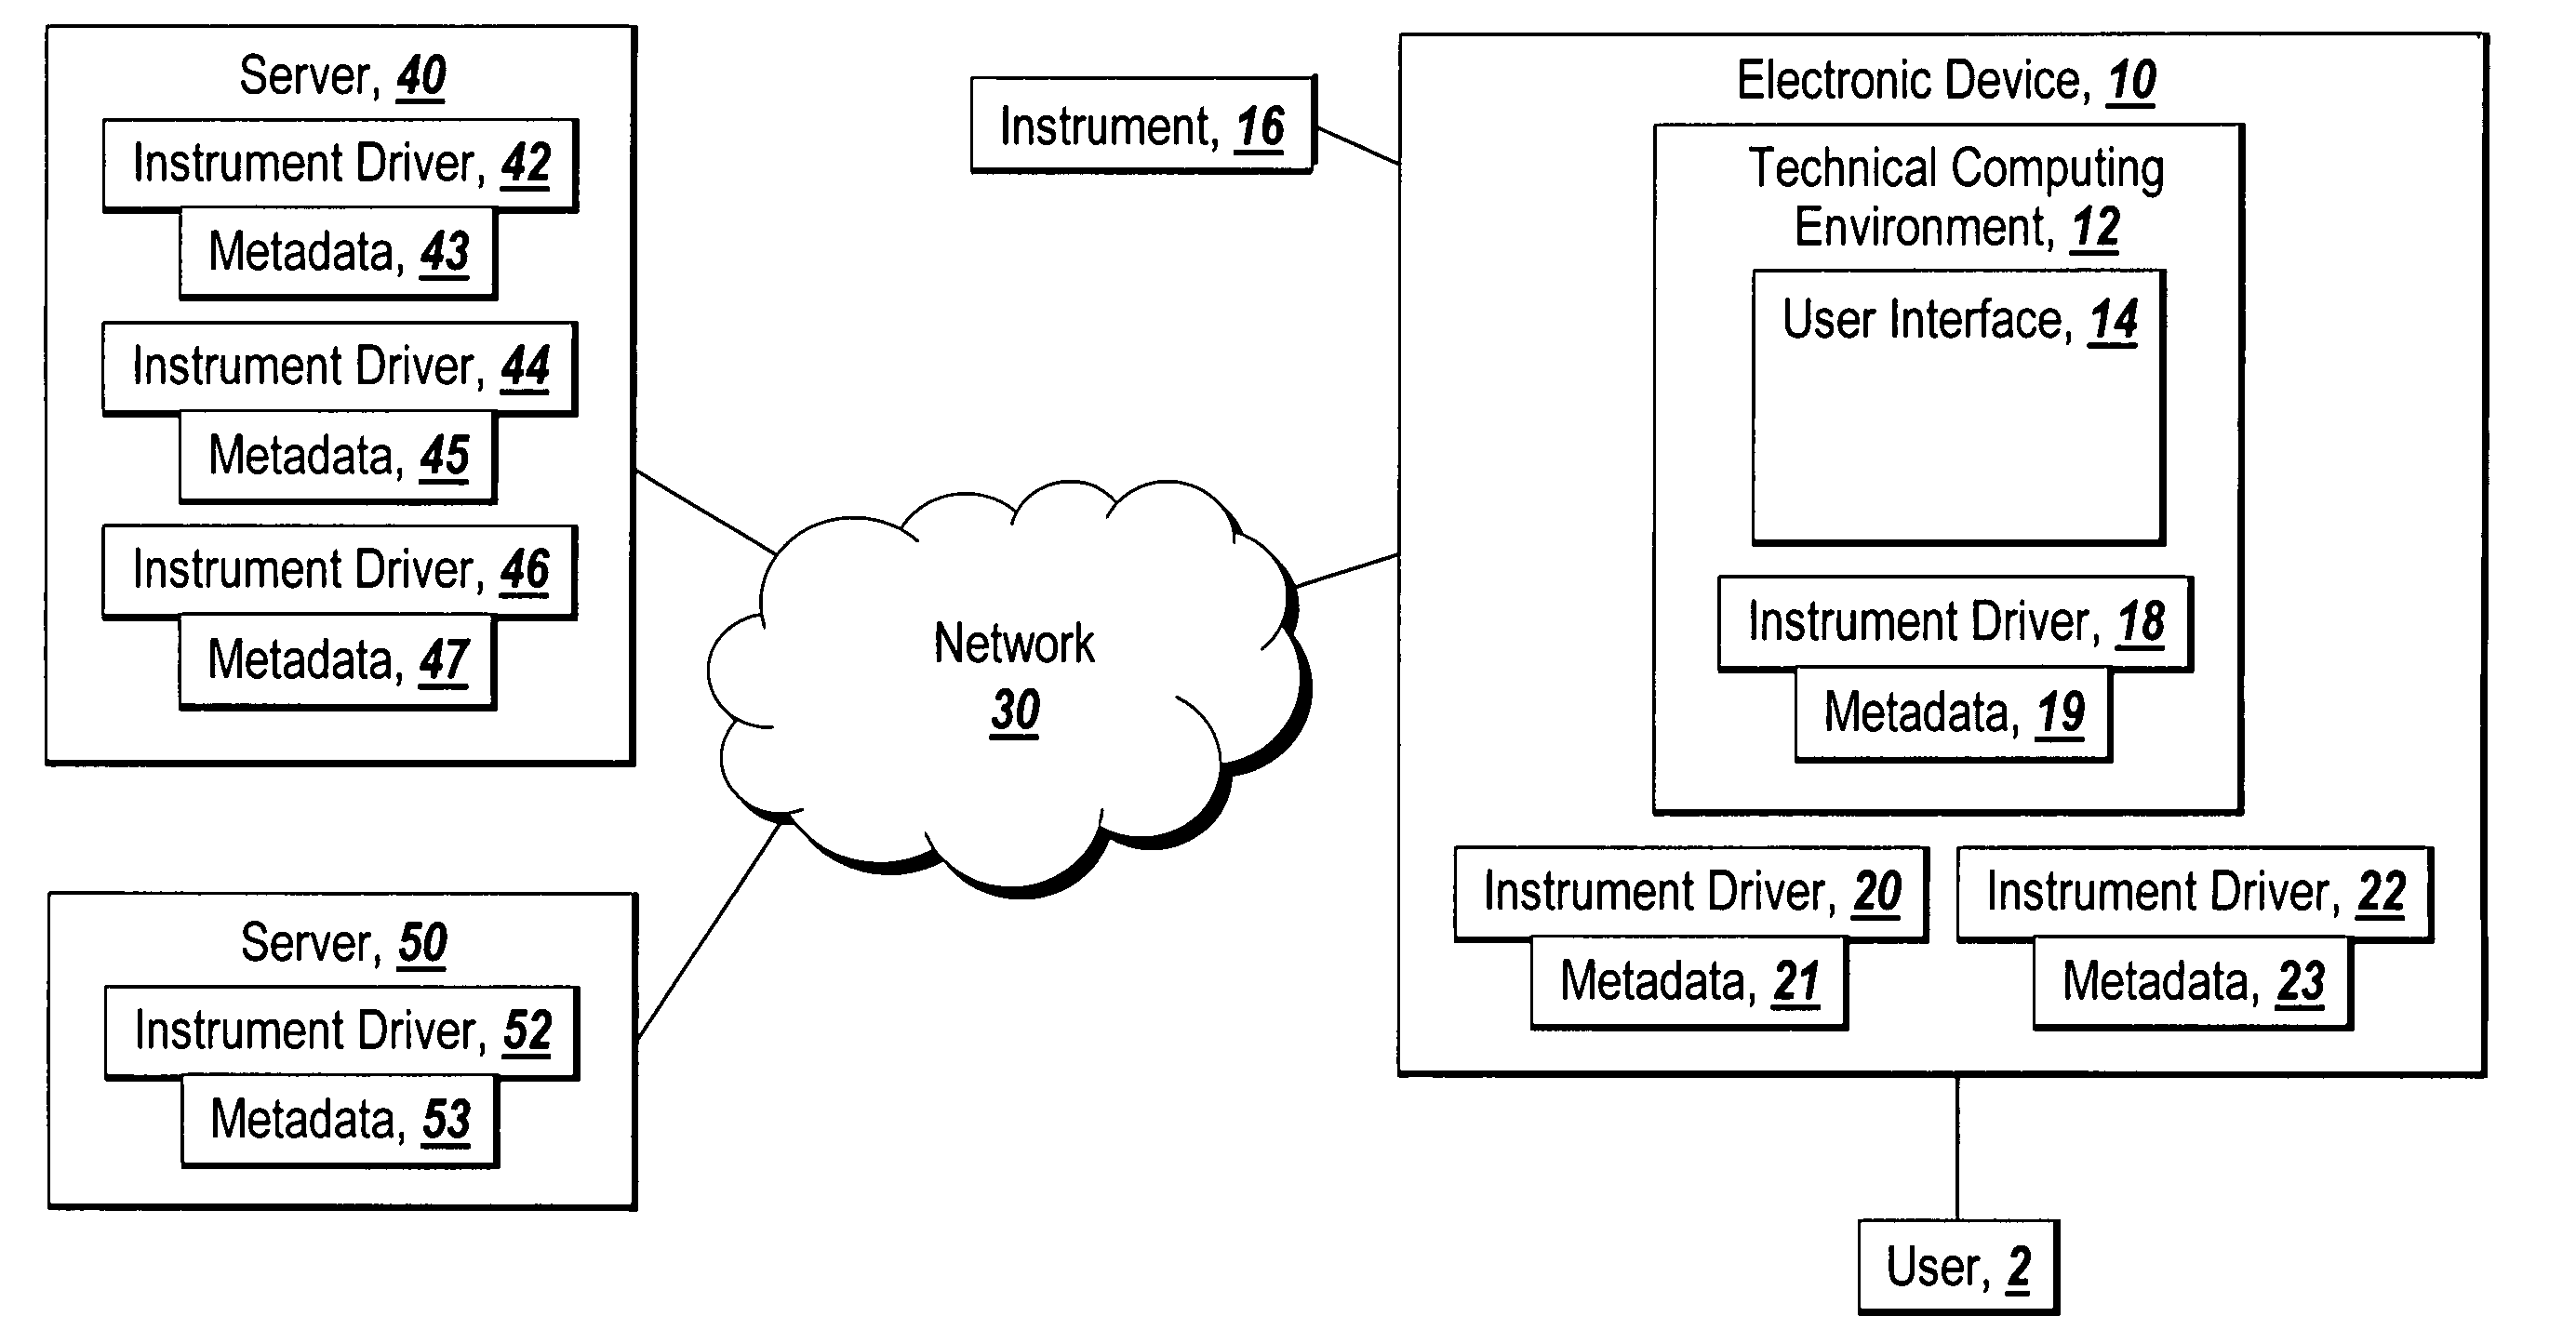 Integrated instrument driver network